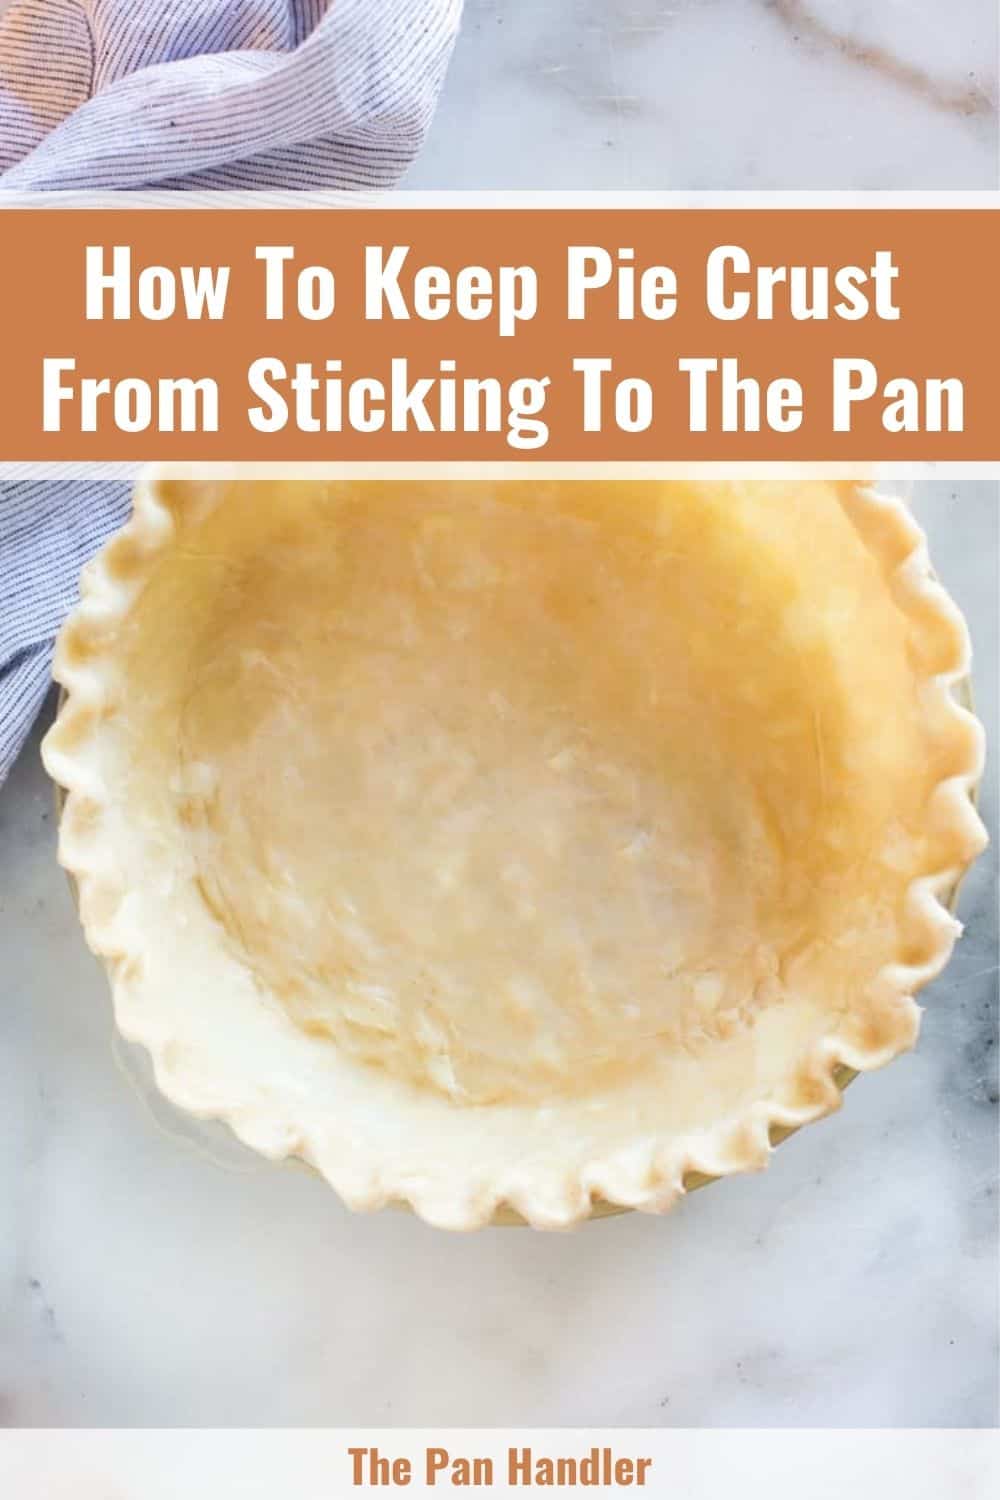 How to keep the crust from sticking to the pan?